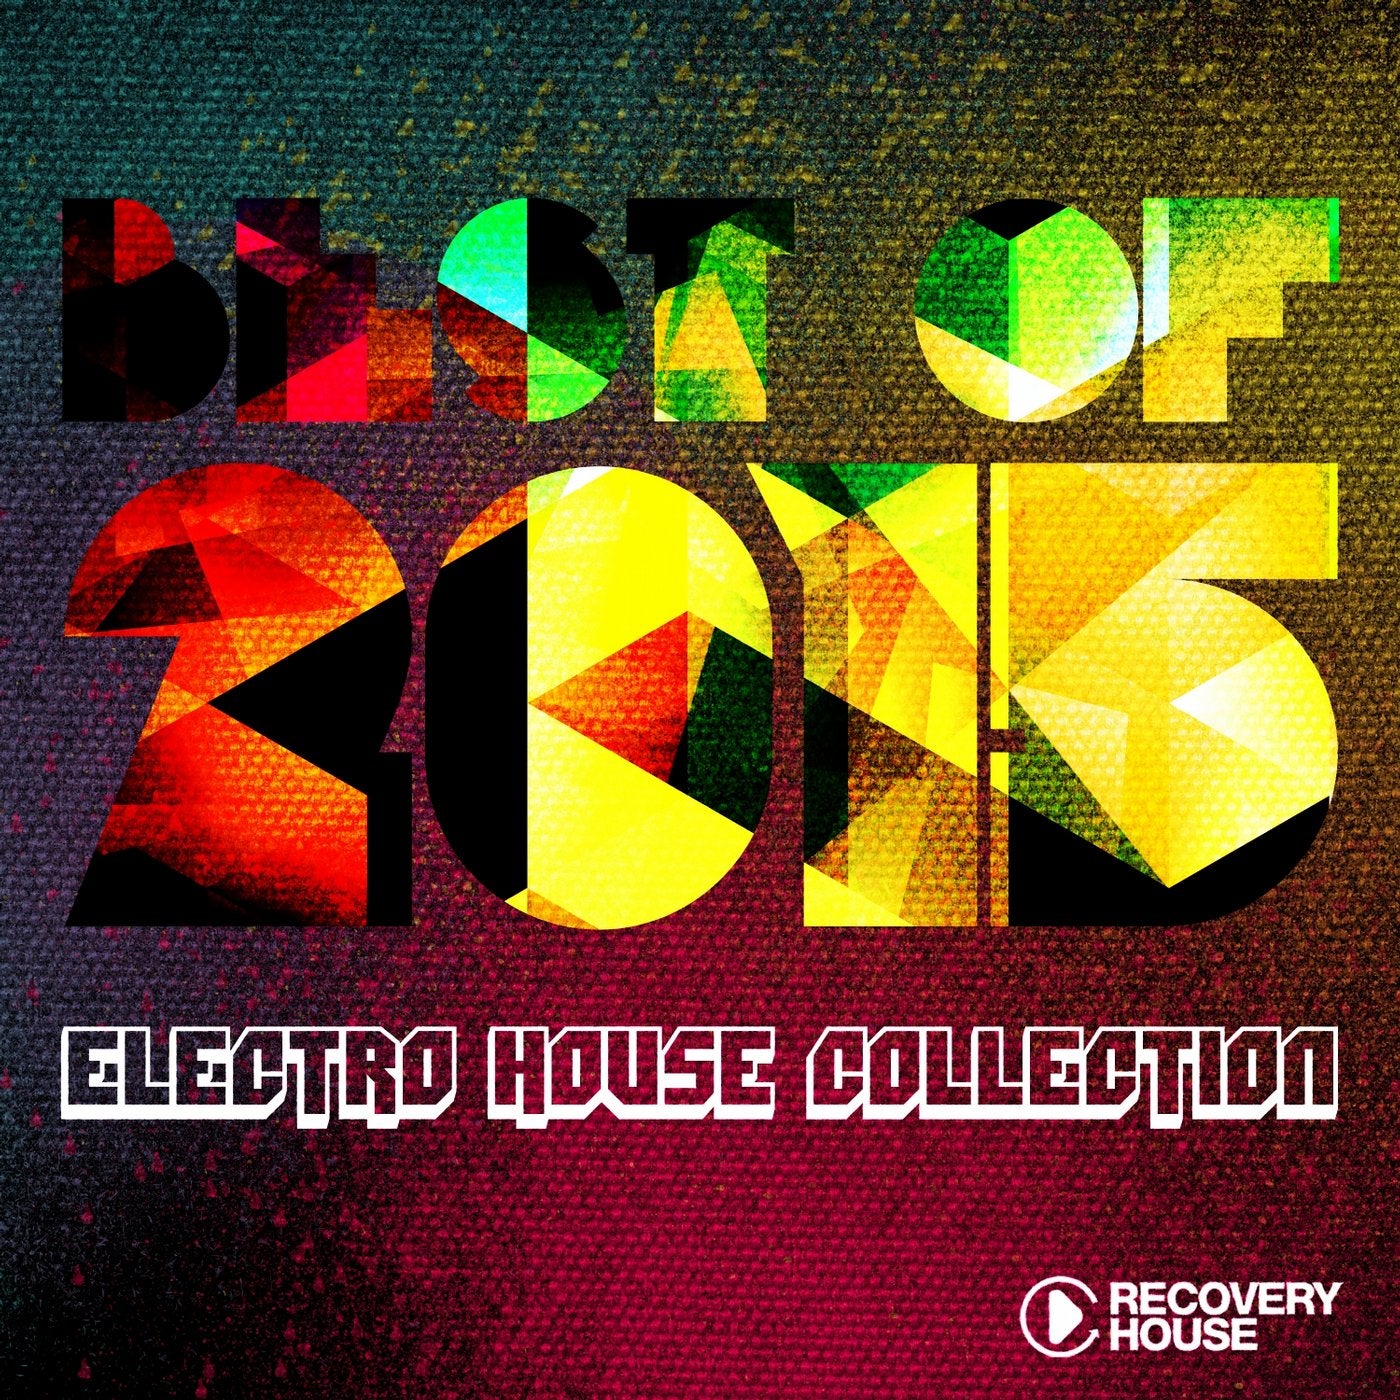 Best Of 2015 - Electro House Music Collection